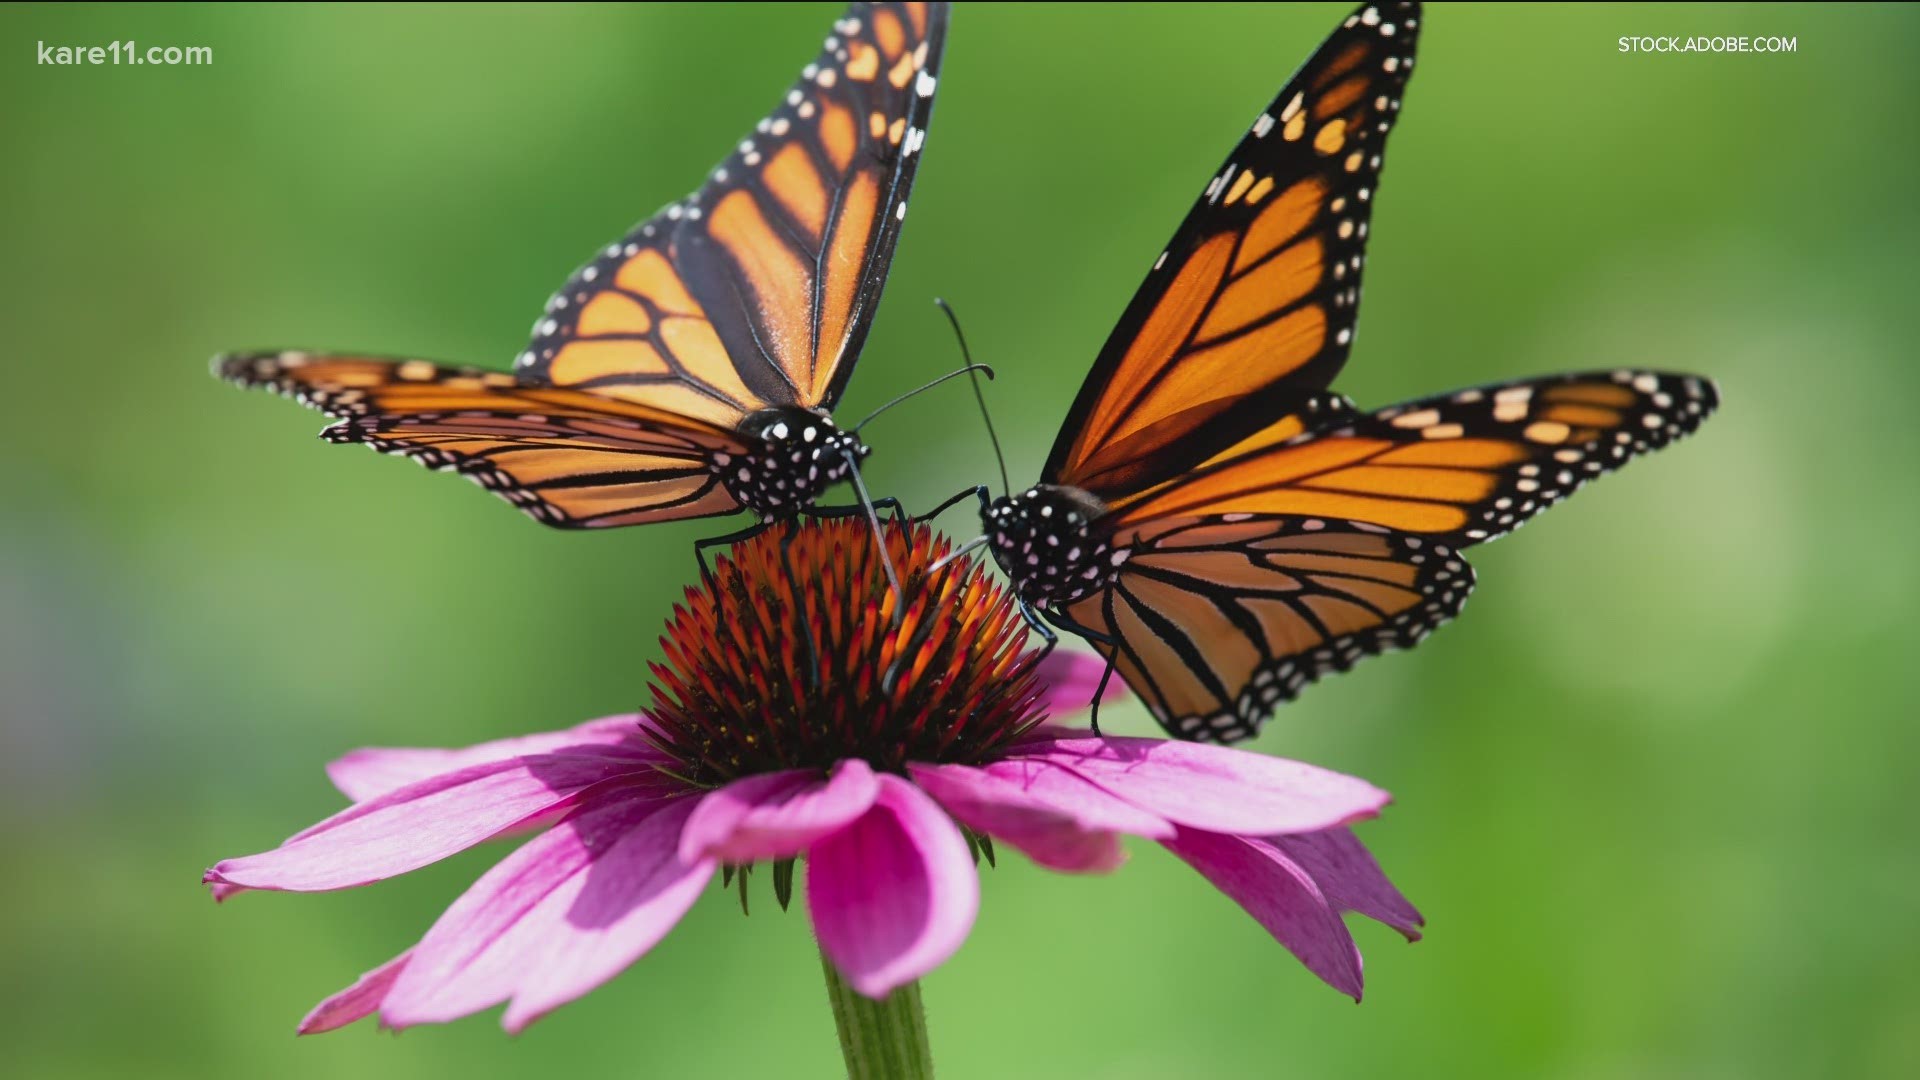 Each shape is suited to different pollinators like honey bees, bumble bees, hummingbirds or butterflies.